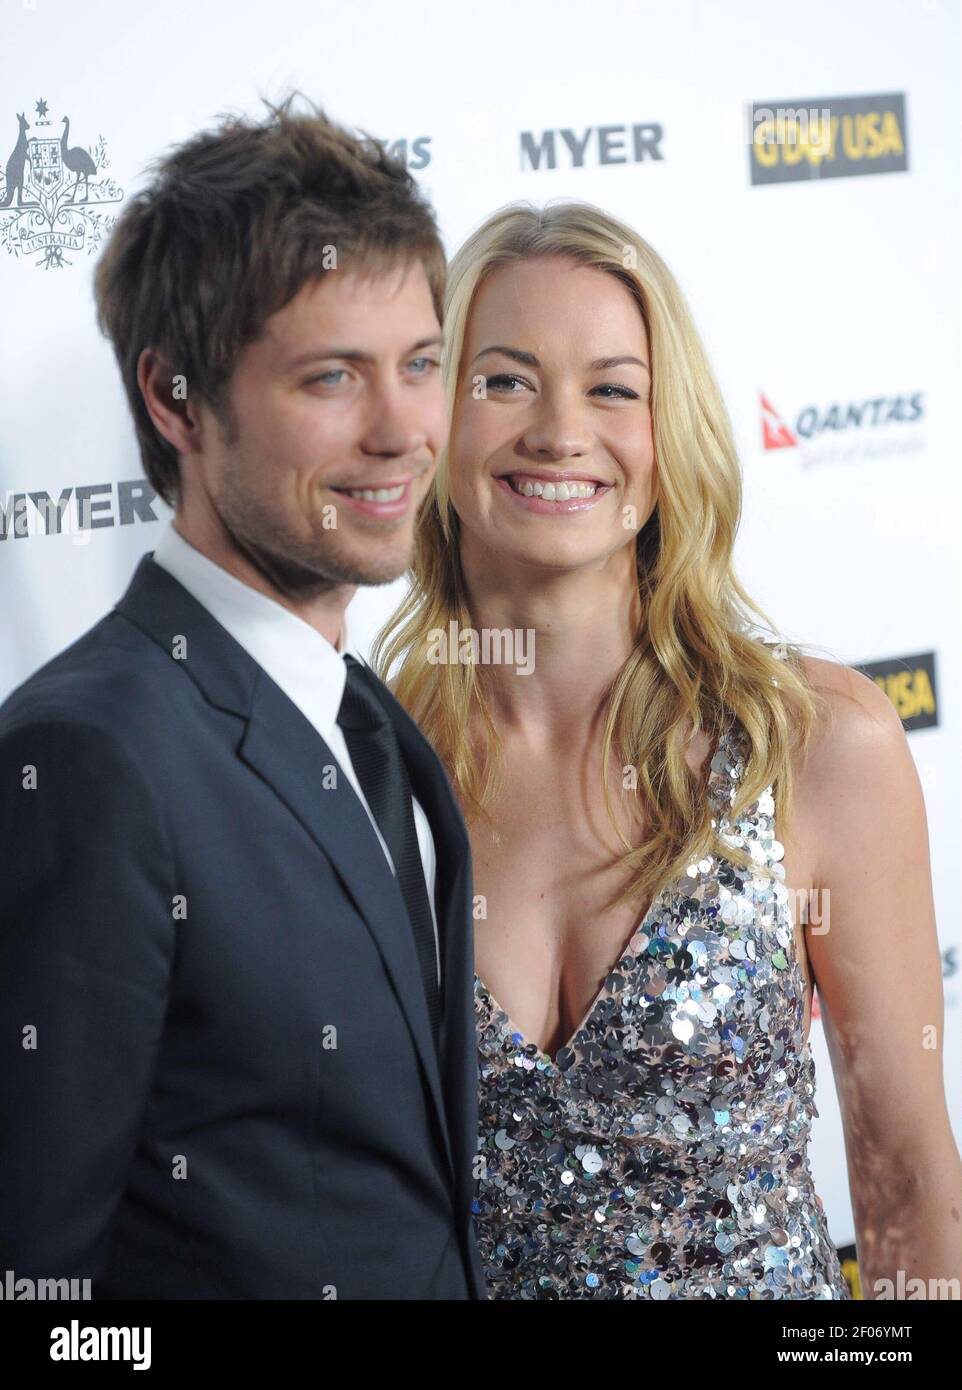 Loden and Yvonne Strahovski. 2011 G'Day Los Angeles Black Tie Gala held at the Hollywood Palladium. 22 Hollywood, CA. Photo Credit: Giulio Marcocchi/Sipa Press./GdayGala gm.203/1101231458 Stock Photo -